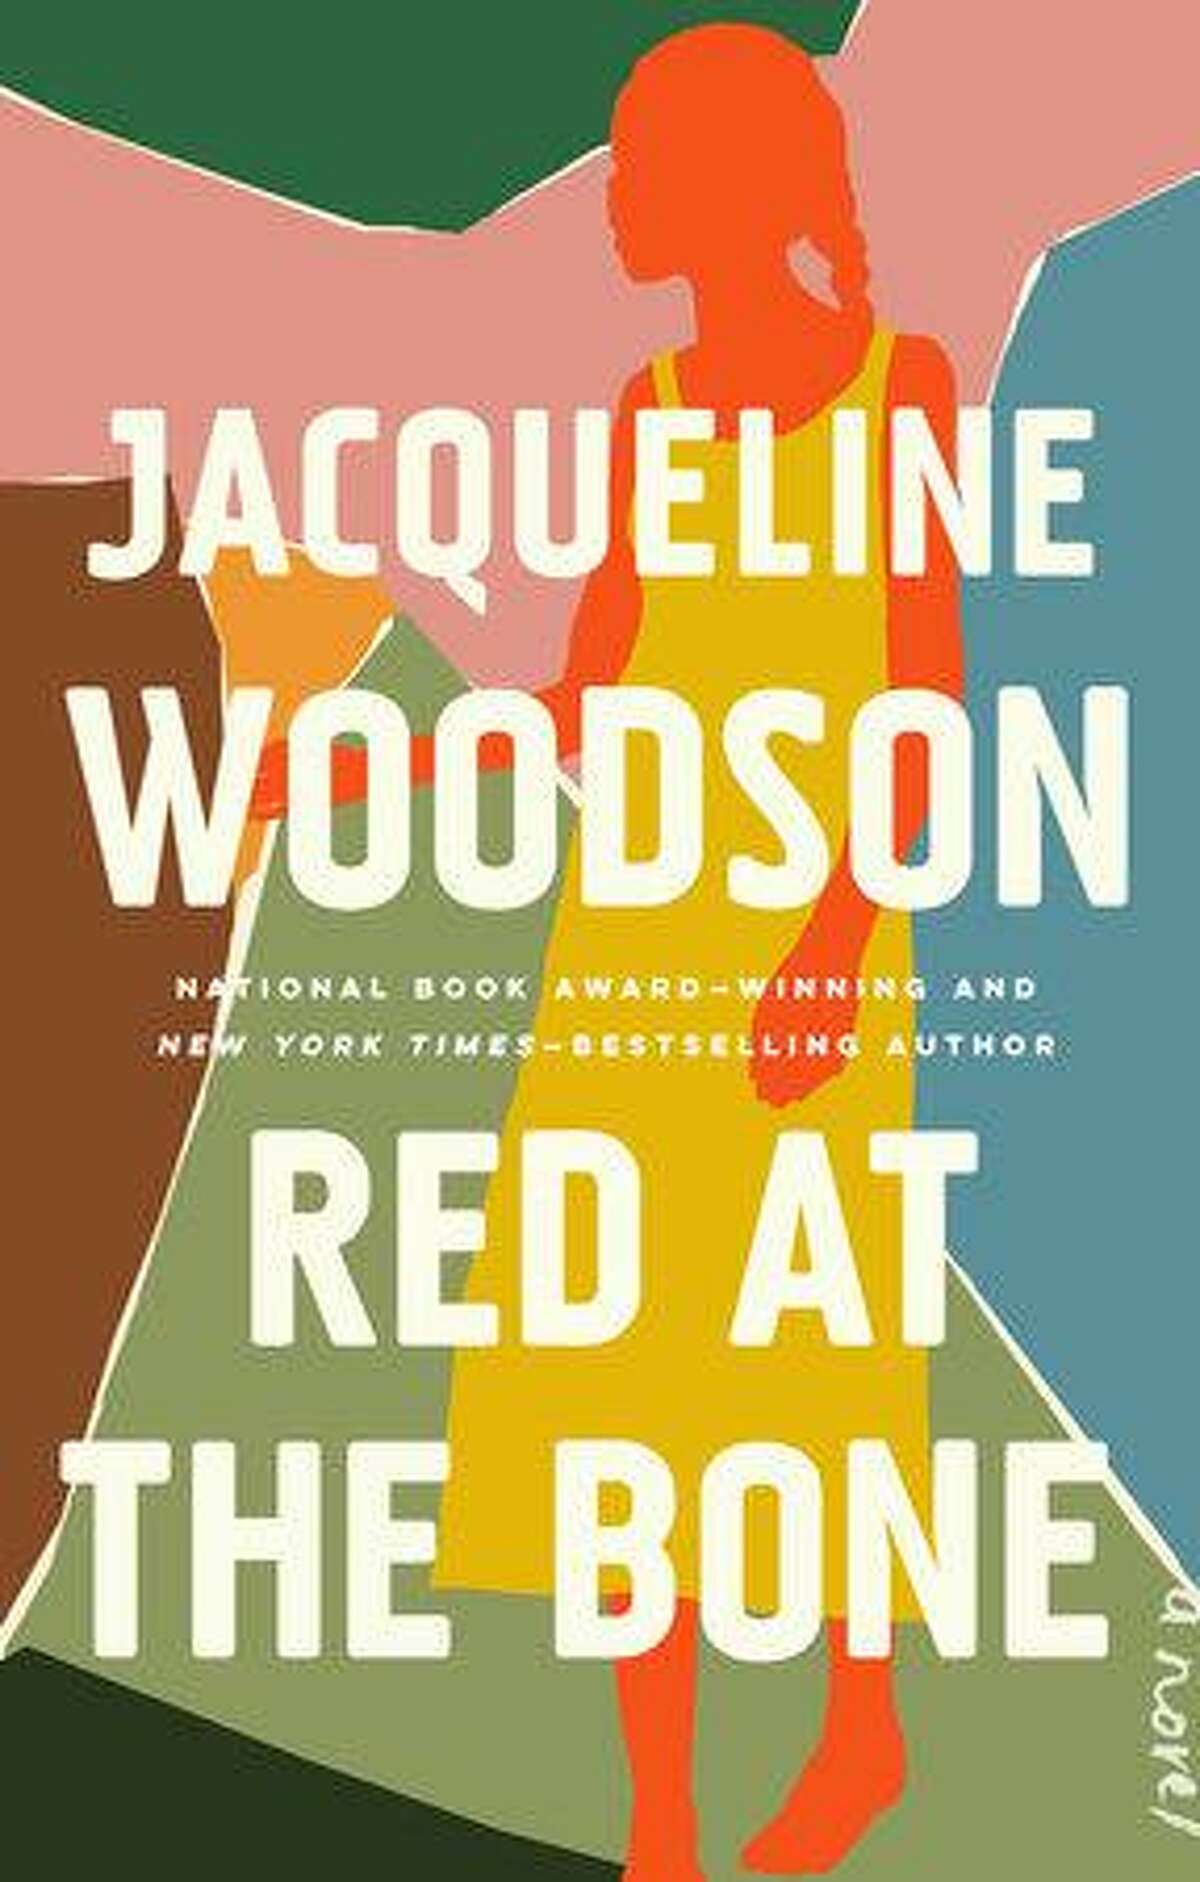 “Red at the Bone” by Jacqueline Woodson.